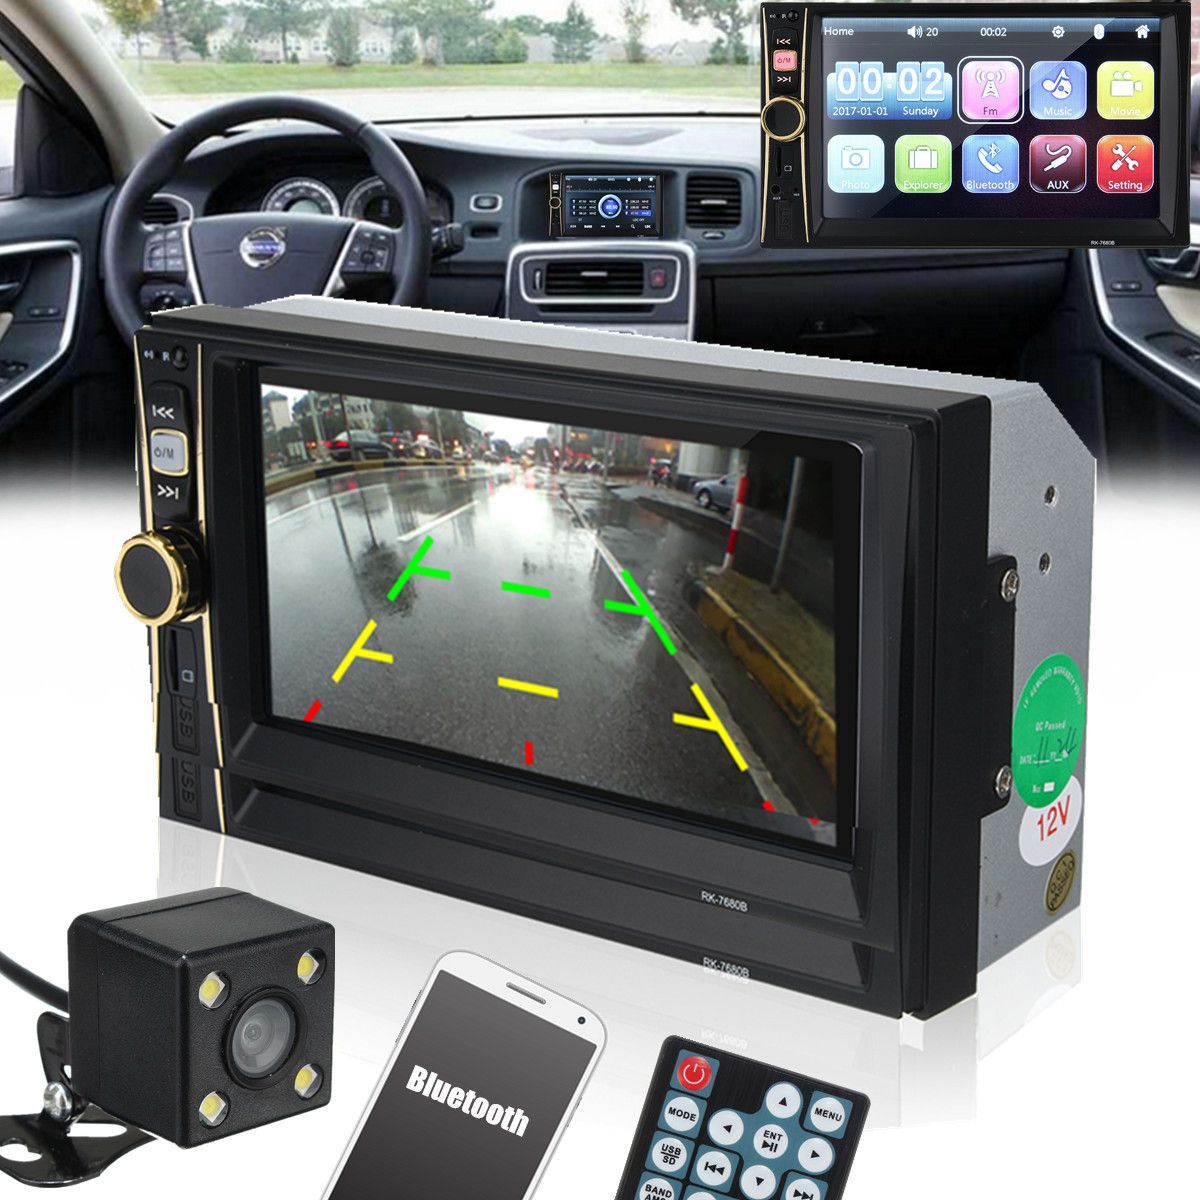 66-Inch-2-DIN-bluetooth-Car-Stereo-MP5-Player-FM-Touch-Screen-Mirror-Link-Rear-Camera-1134735